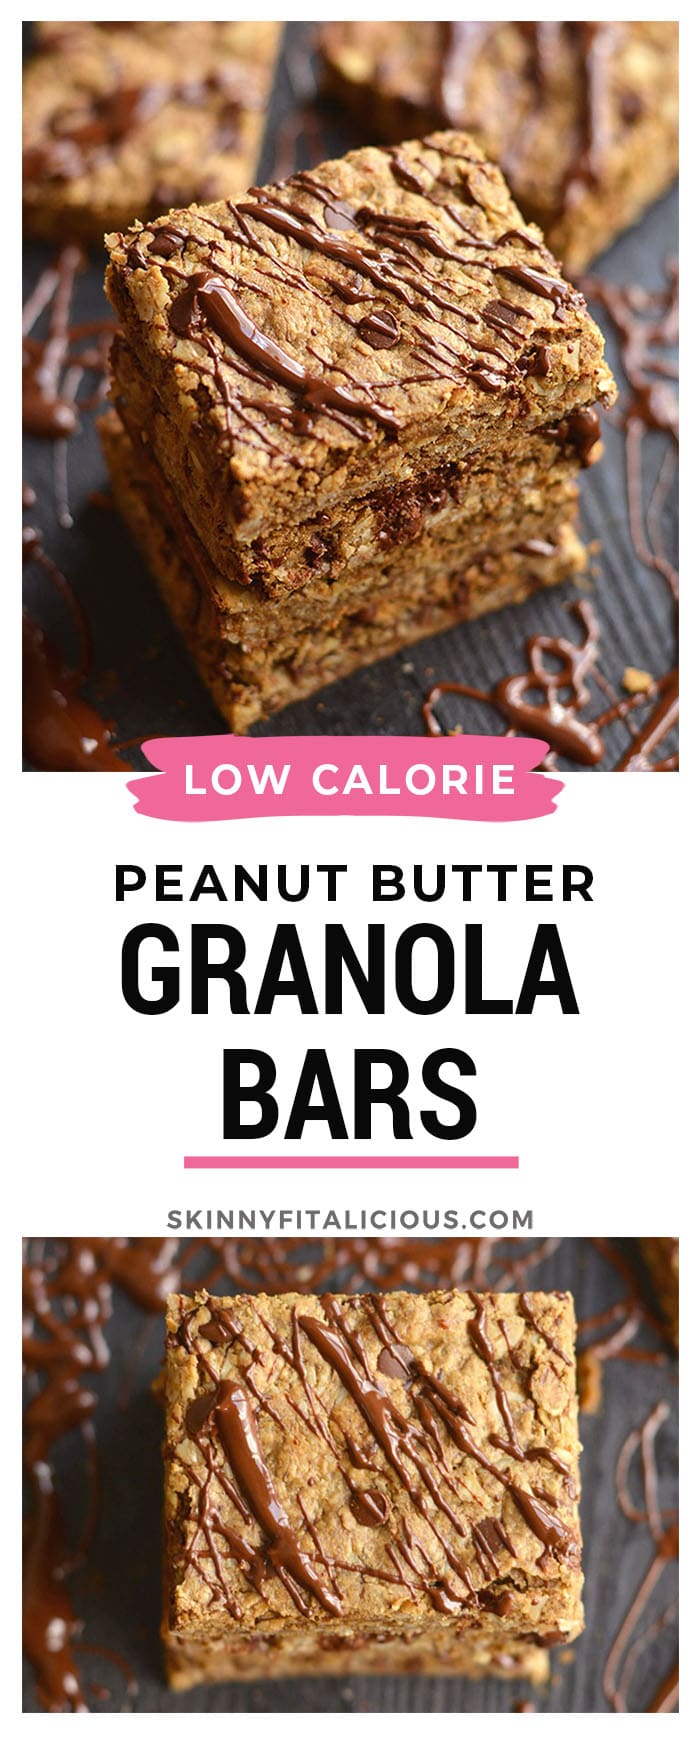 Chocolate Peanut Butter Granola Bars with protein & oats! Loaded with complex carbs, healthy fats and protein, this homemade granola bar recipe is perfect for healthy breakfast or snack! Gluten Free + Low Calorie + Vegan